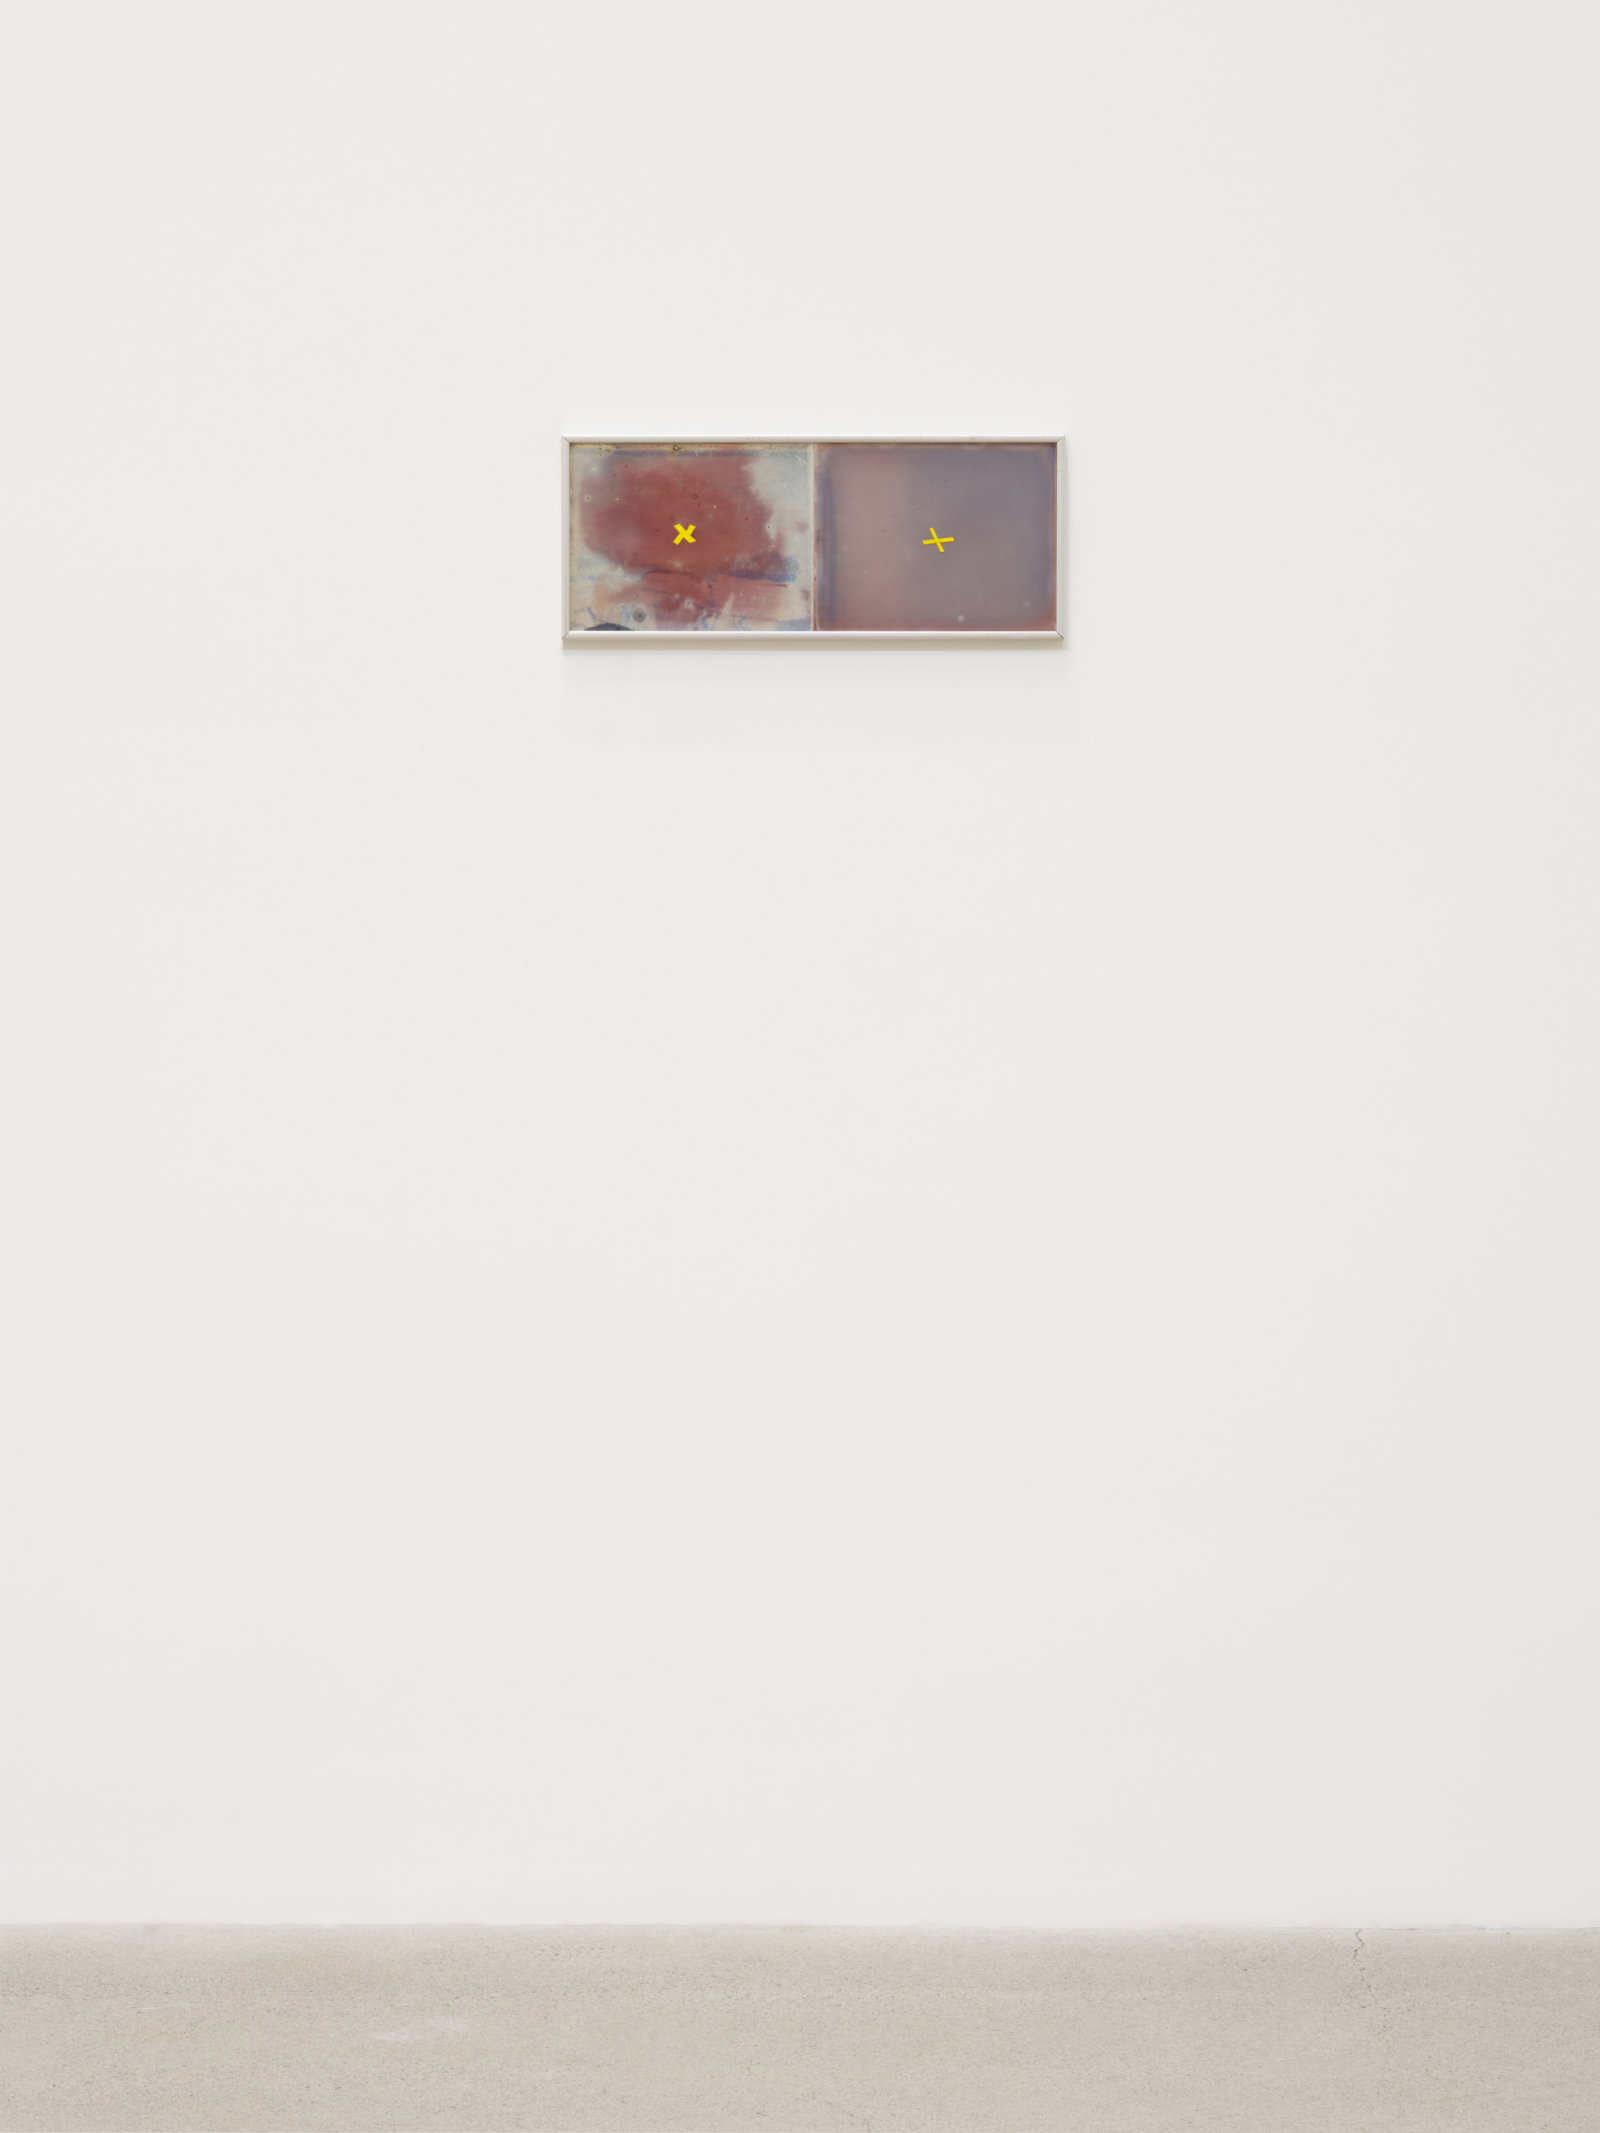 Jerry Pethick, Conjugate, 1969–1970, transmission holograms, 7 x 20 in. (18 x 51 cm)